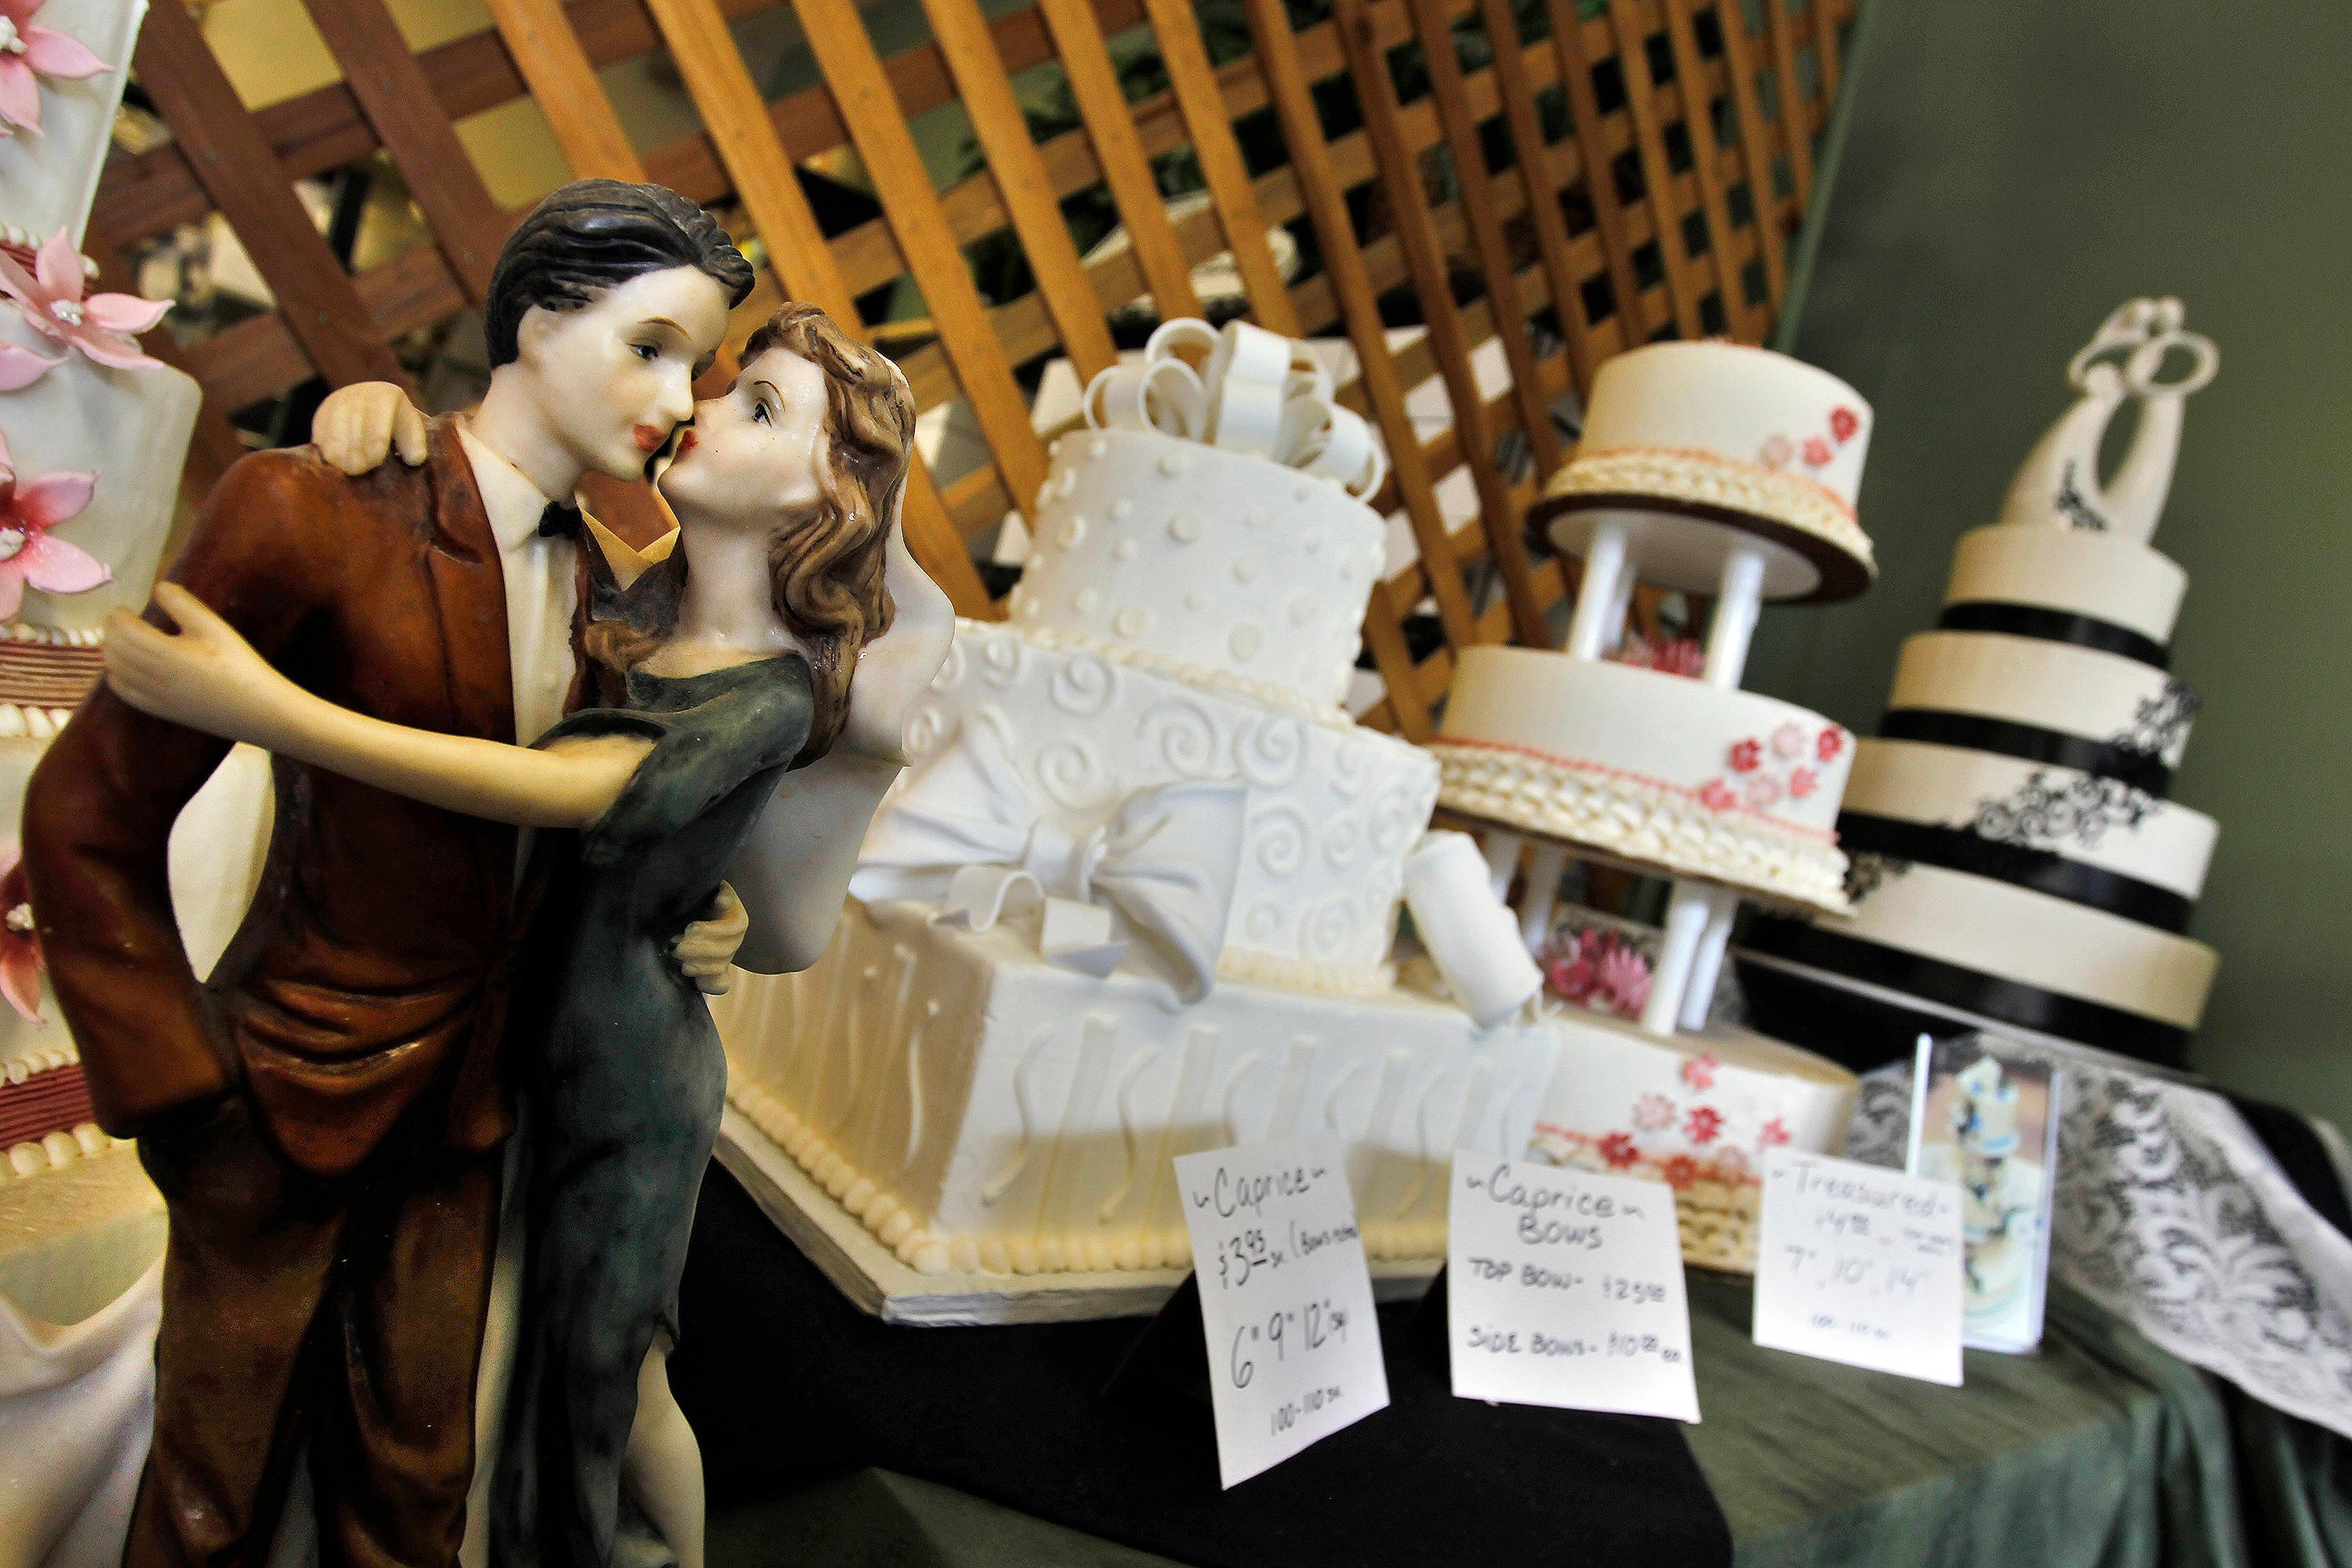 Photo: Figurines are depicted in an embrace at a wedding cake display at Masterpiece Cakeshop, in Denver,